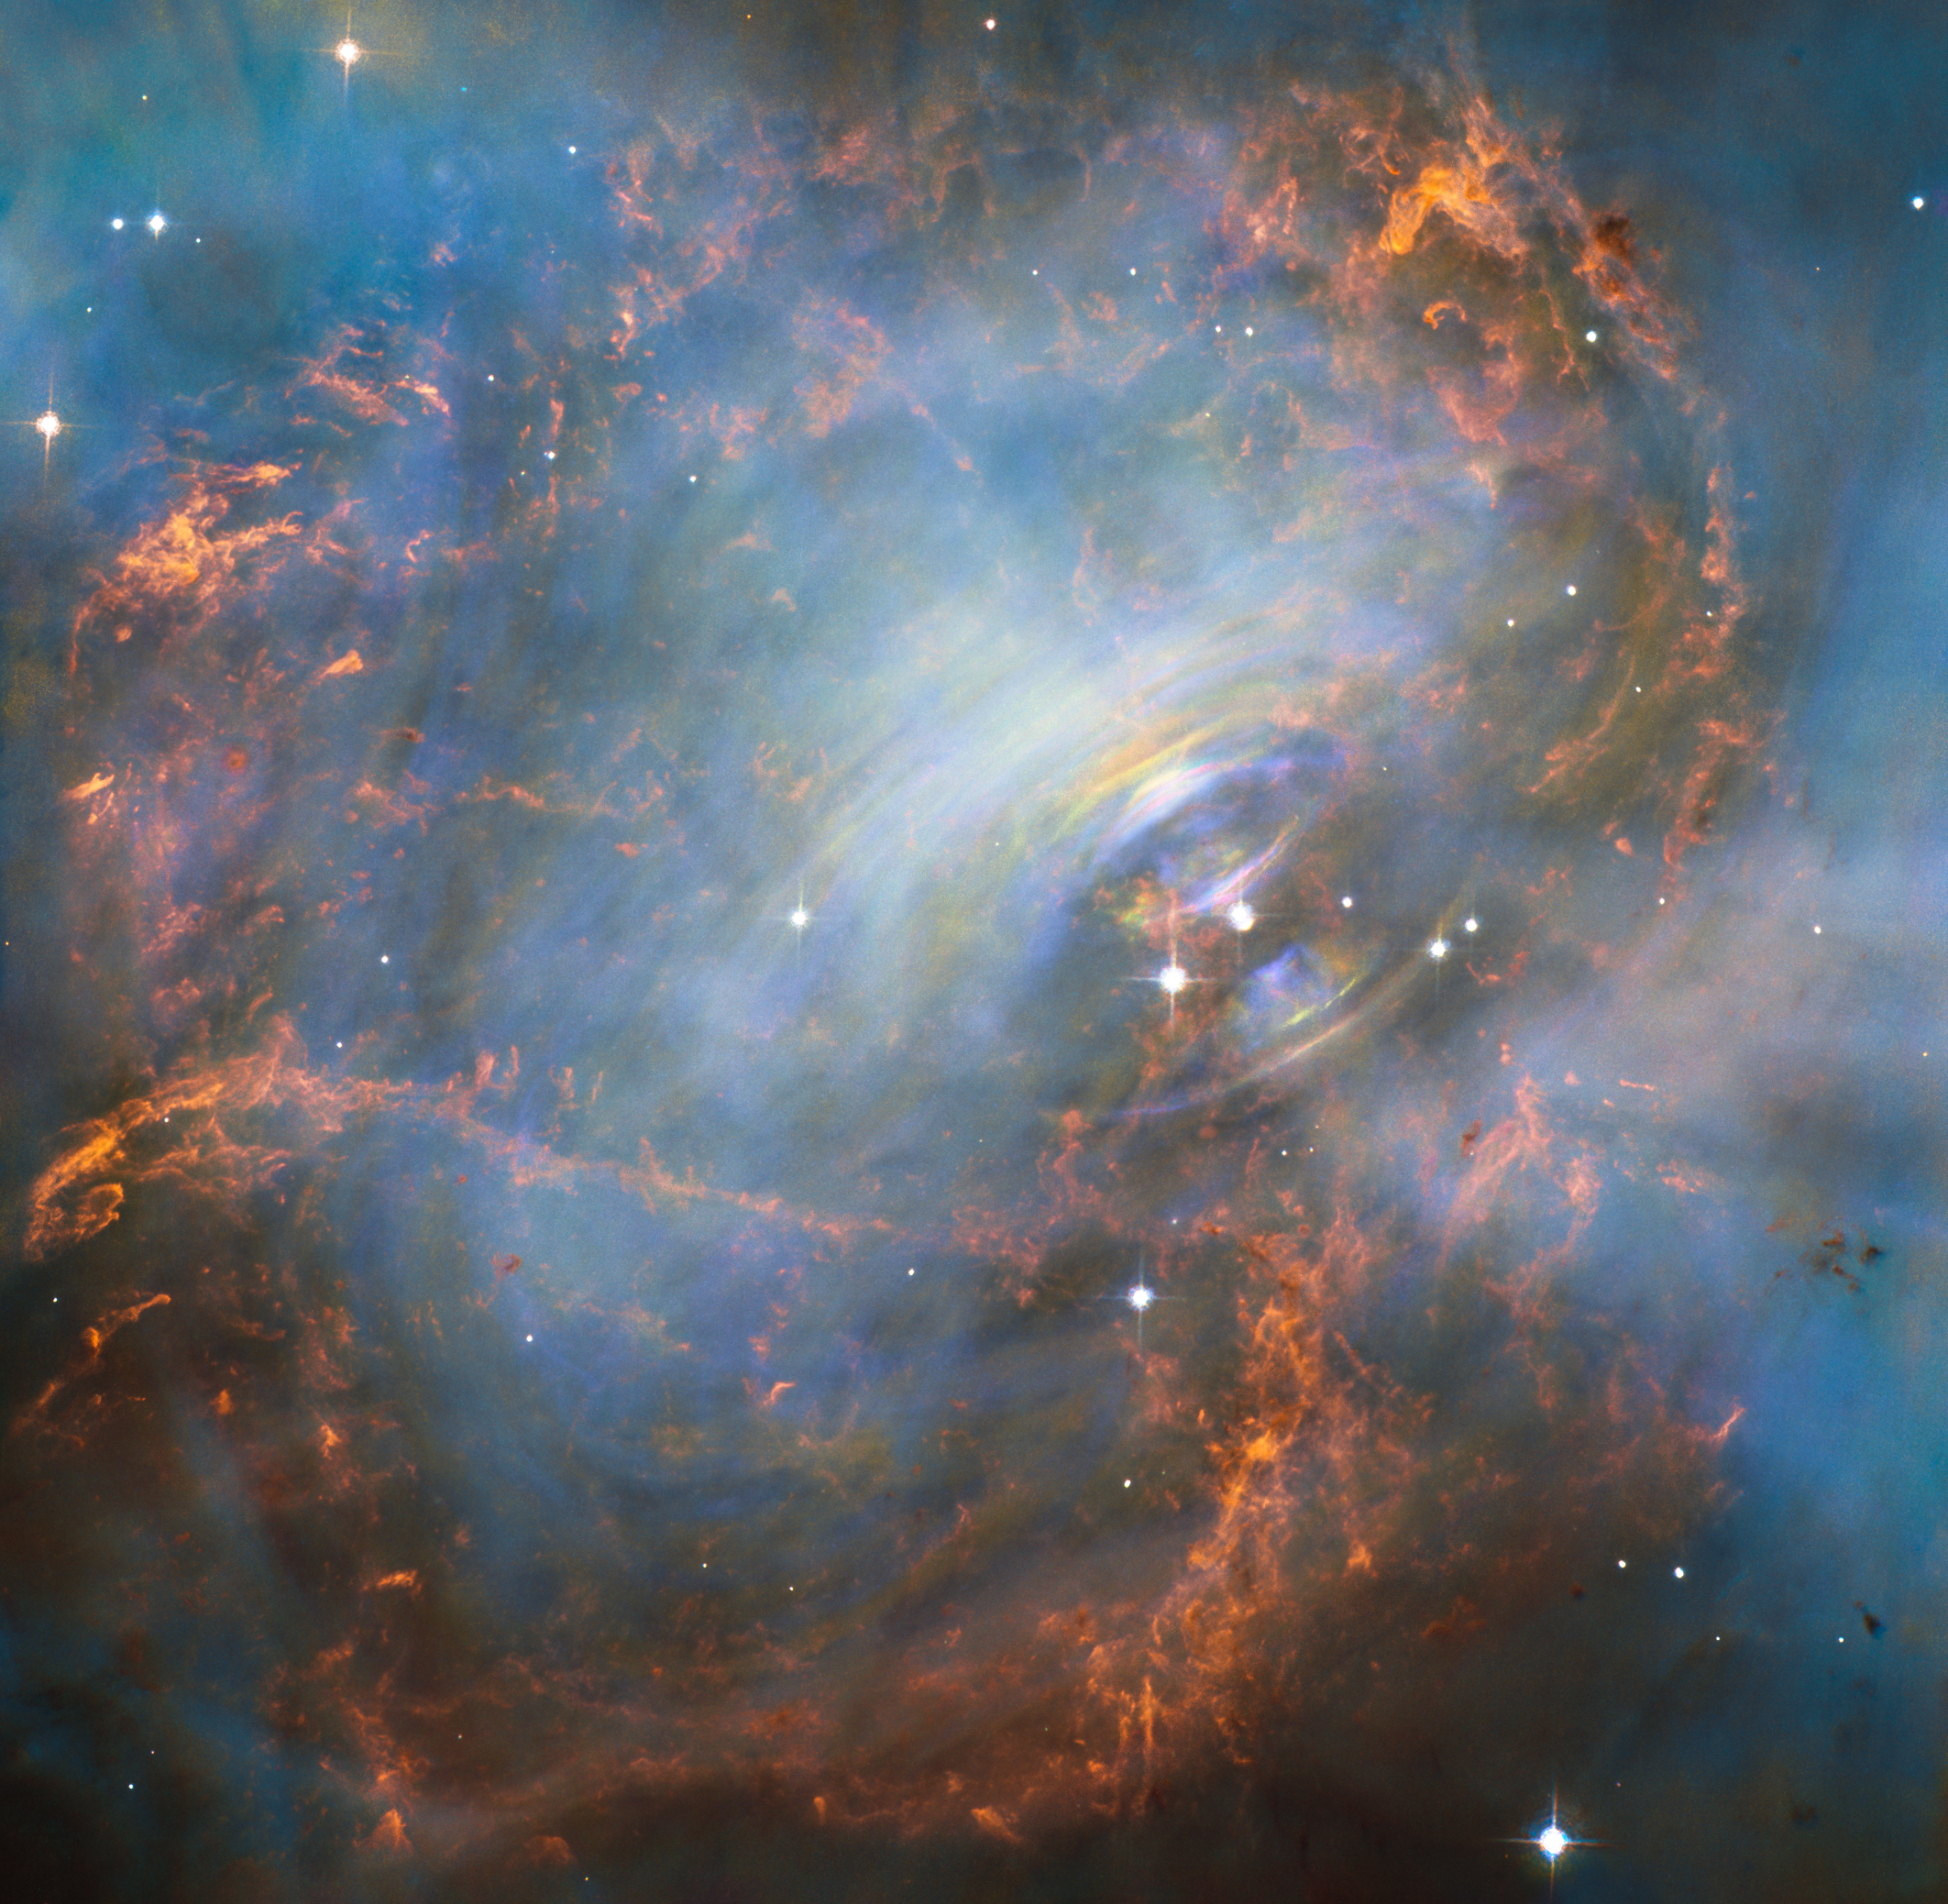 While many other images of the famous Crab Nebula nebula have focused on the filaments in the outer part of the nebula, this image shows the very heart of the Crab Nebula including the central neutron star — it is the rightmost of the two bright stars near the centre of this image. The rapid motion of the material nearest to the central star is revealed by the subtle rainbow of colours in this time-lapse image, the rainbow effect being due to the movement of material over the time between one image and another.